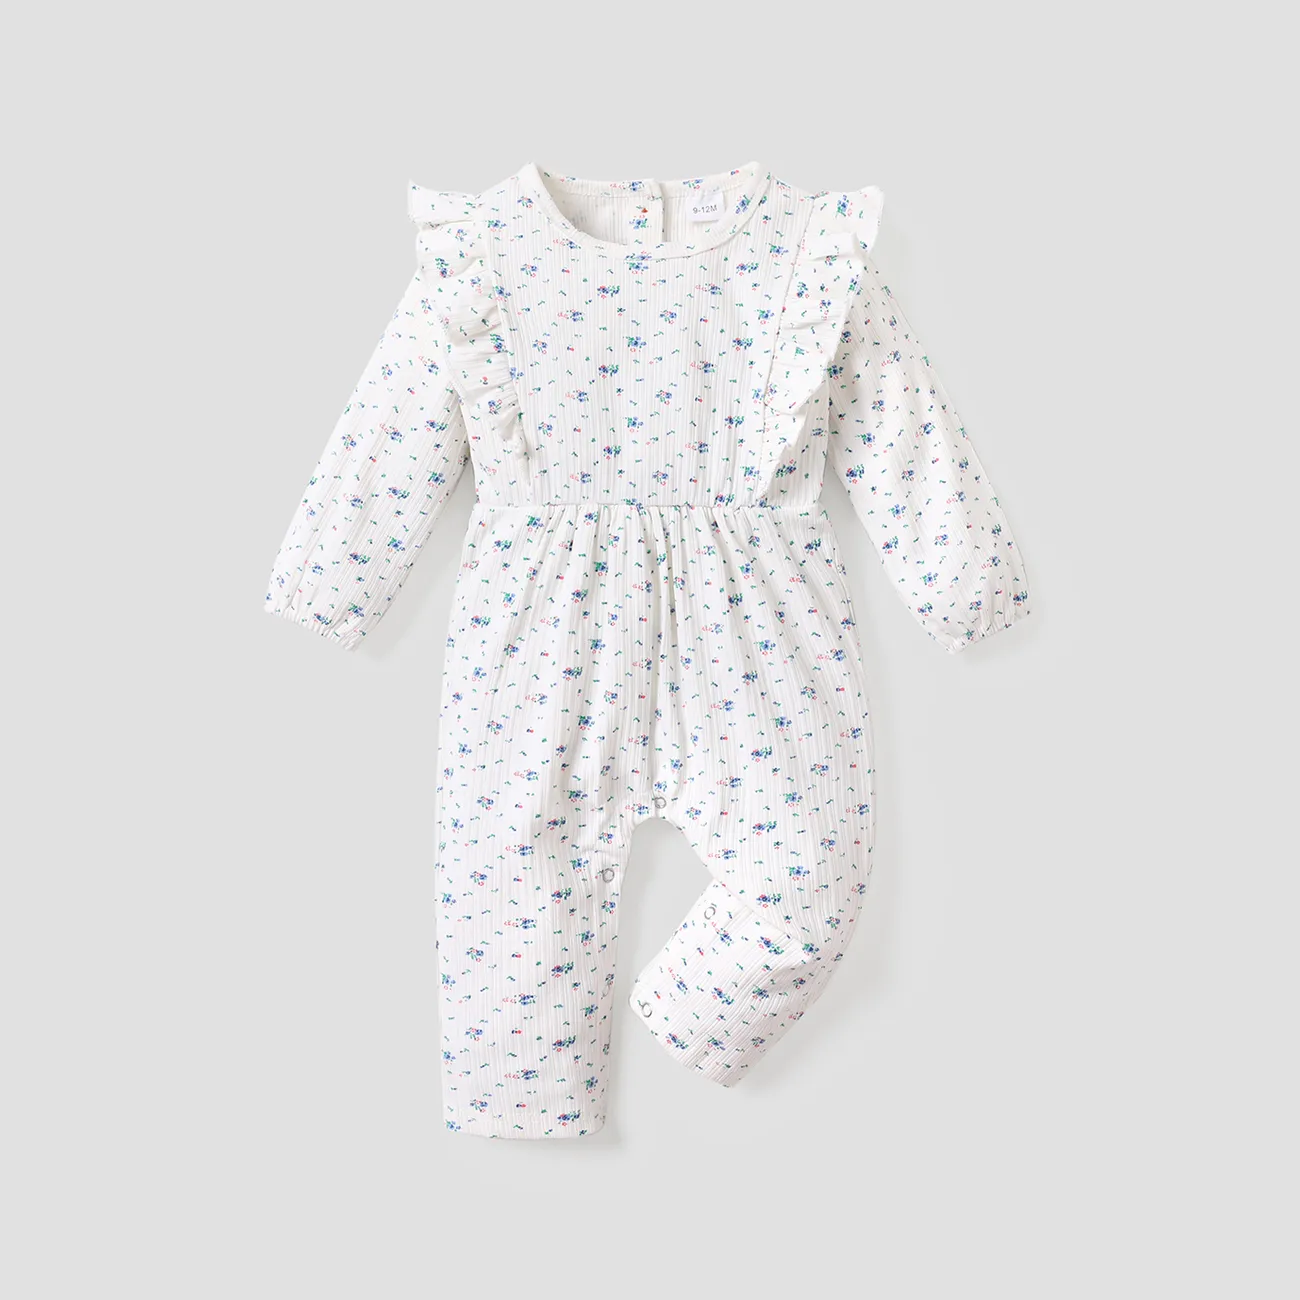 Ribbed Floral Allover Ruffle Decor Long-sleeve Baby Jumpsuit White big image 1